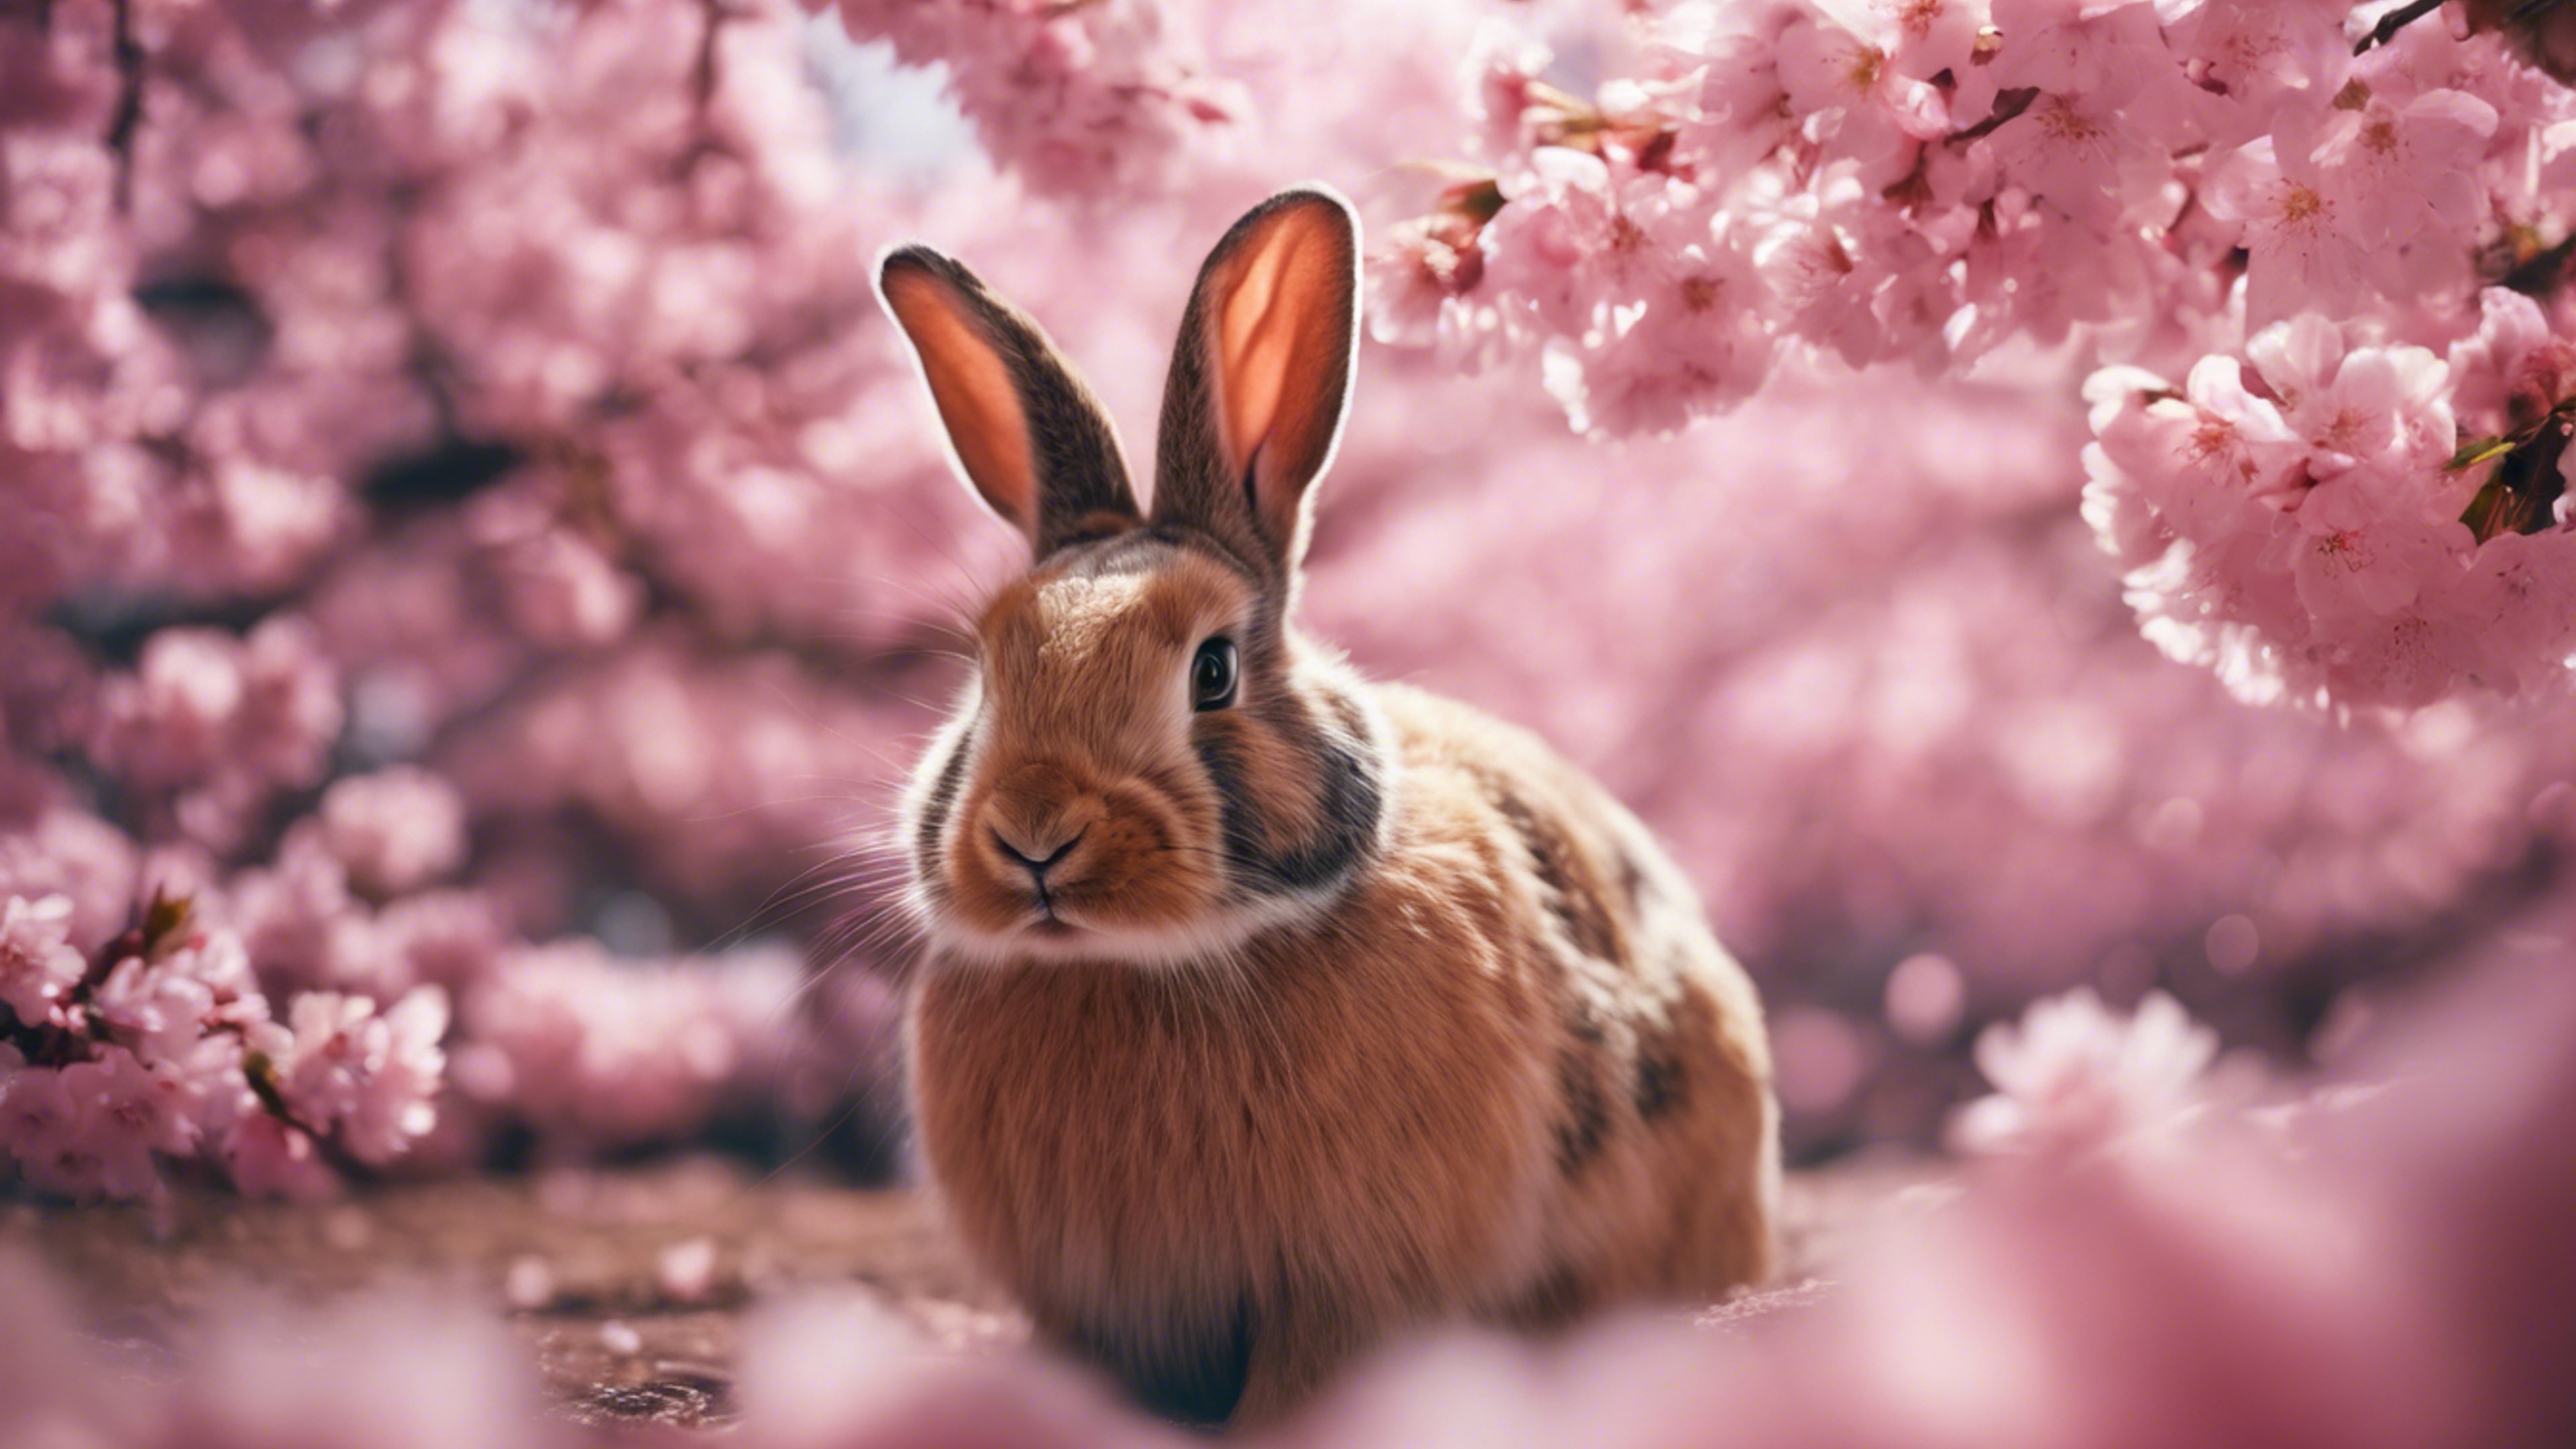 A rabbit amid a cherry blossom festival, surrounded by vibrant pink petals. Sfondo[82443ce6430044309a8d]